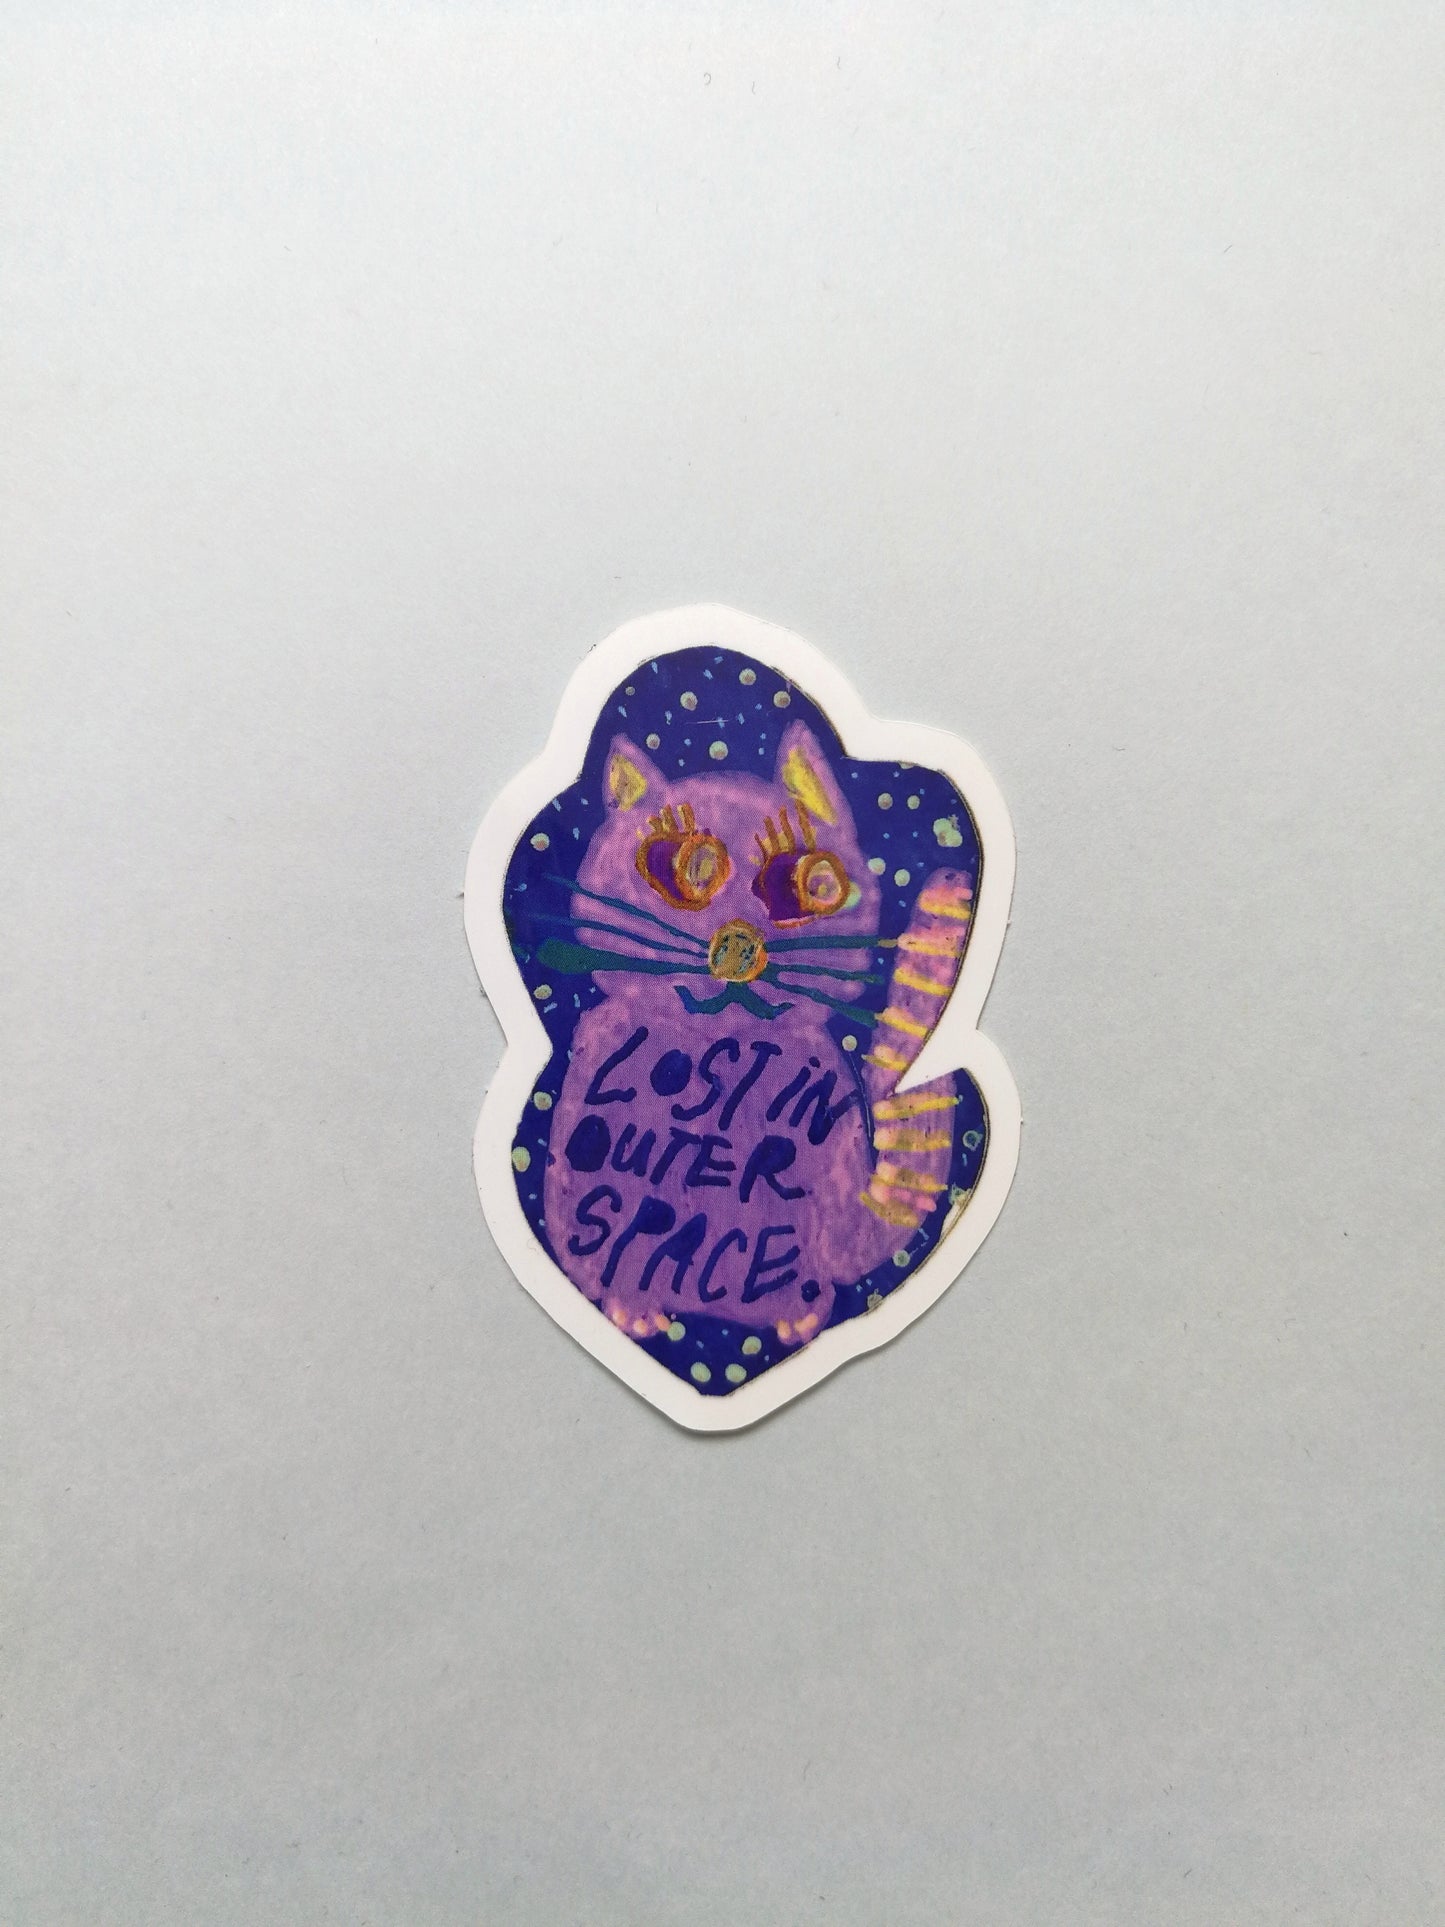 Sticker: Lost in outer space